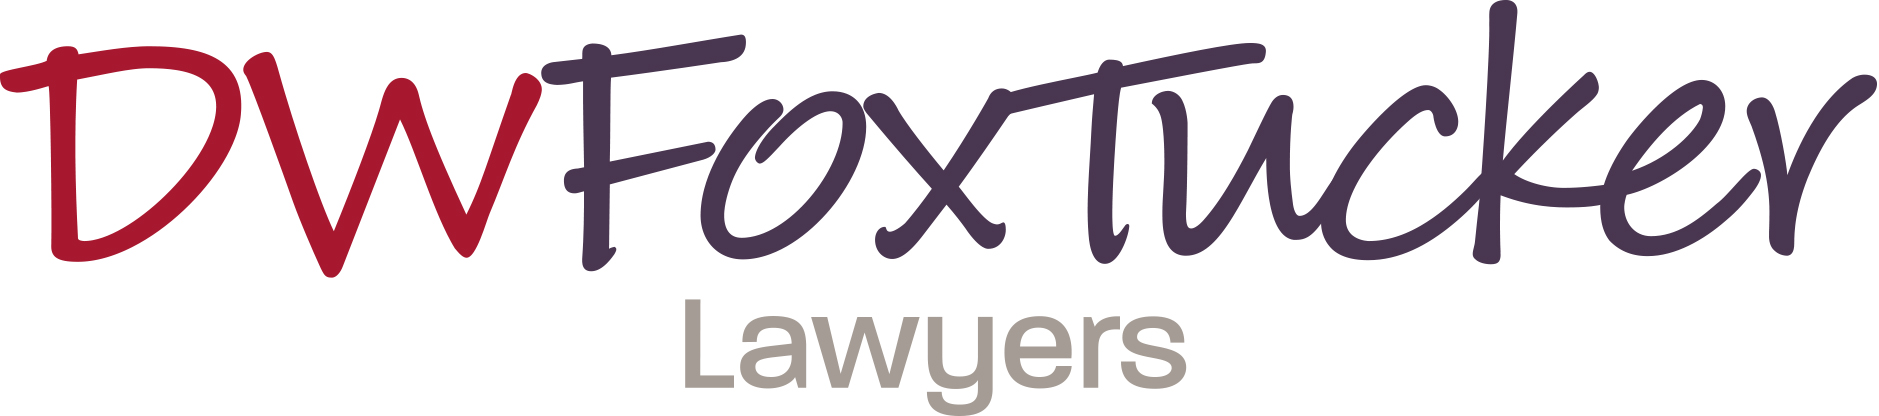 DW Fox Tucker Lawyers - The ABC's of Debt Recovery (DW Fox Tucker Event Only)